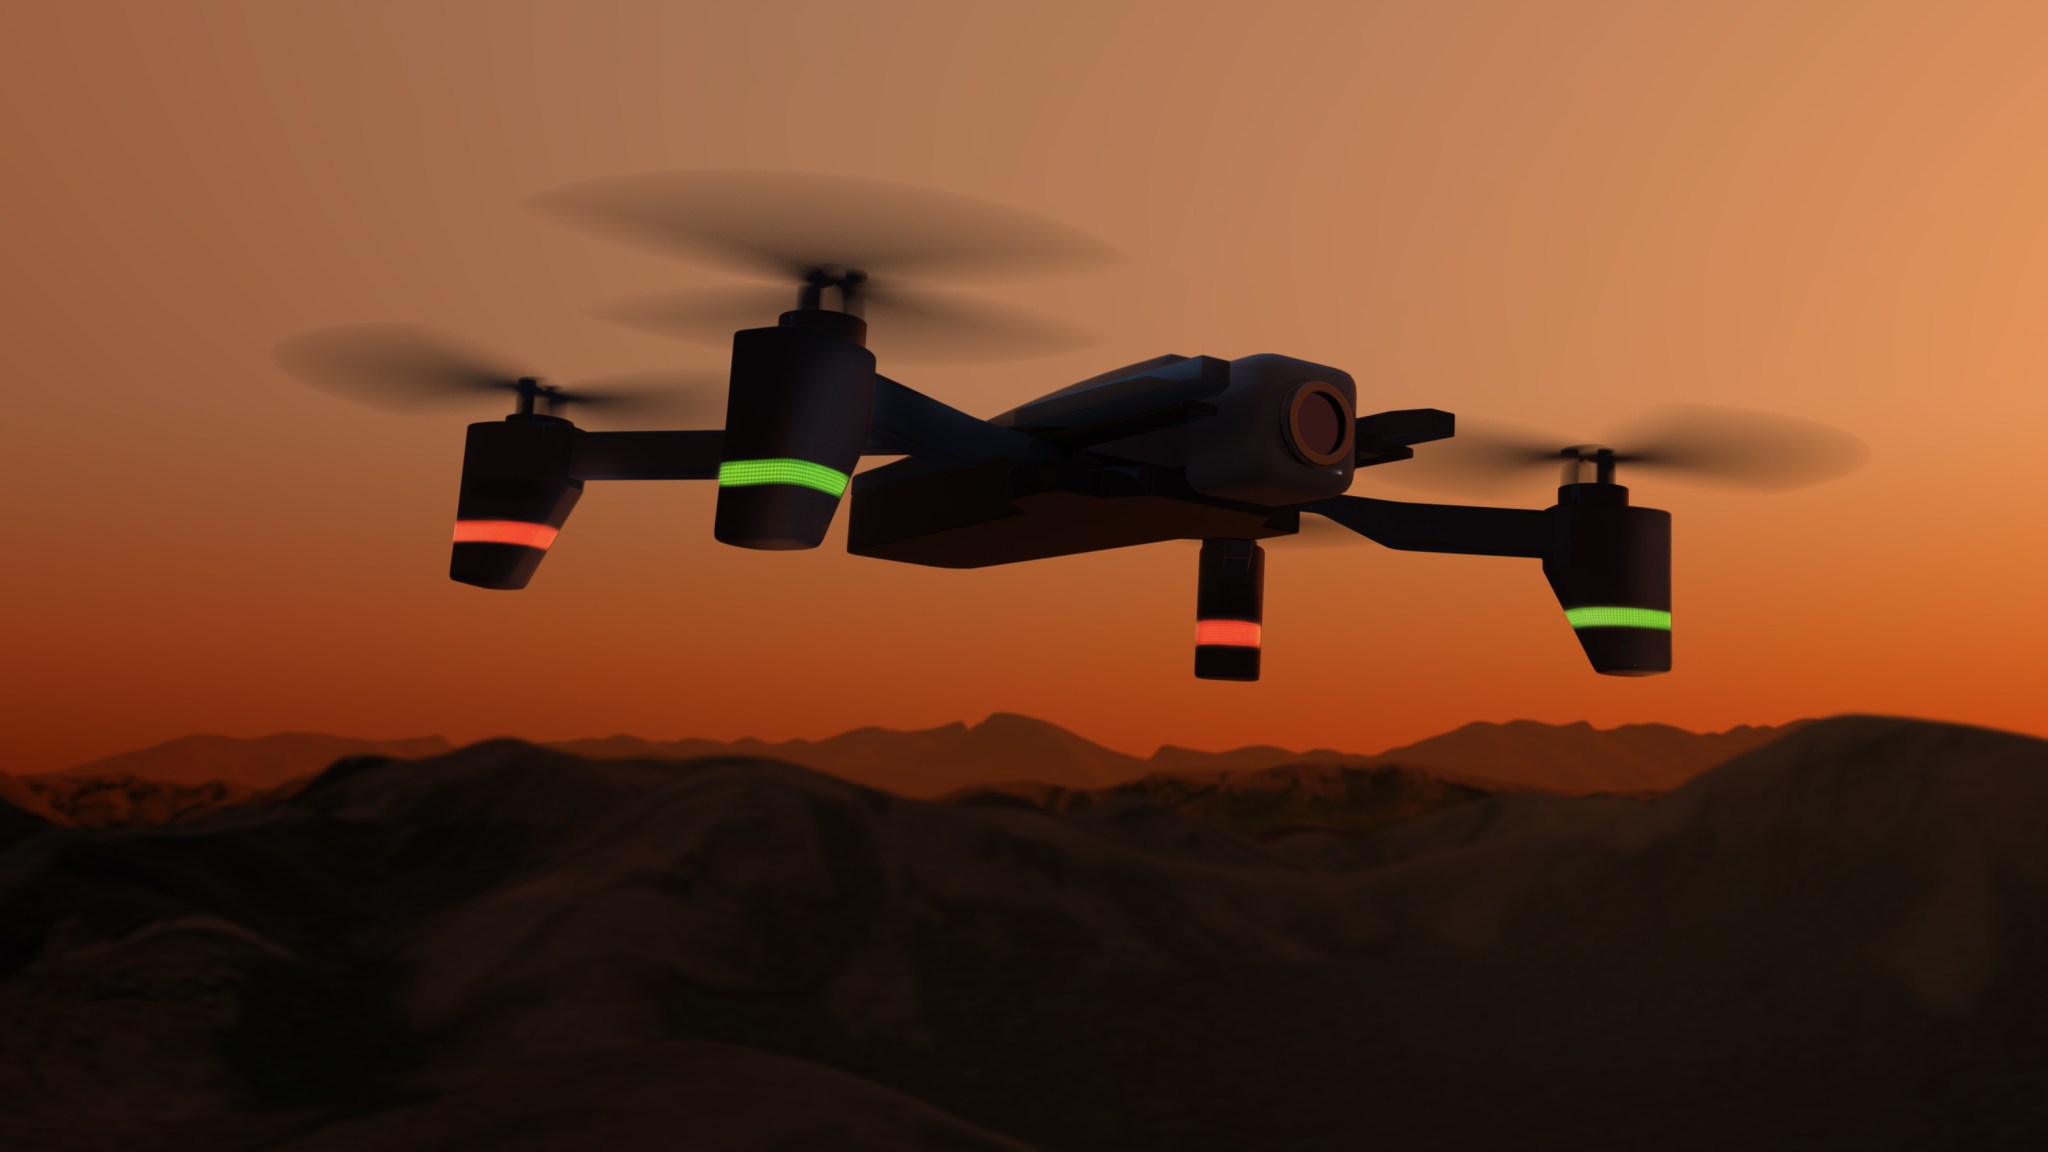 Wildfire Drone flying through the air while the sun is setting in the background. This is an example of what ACERO might look like.